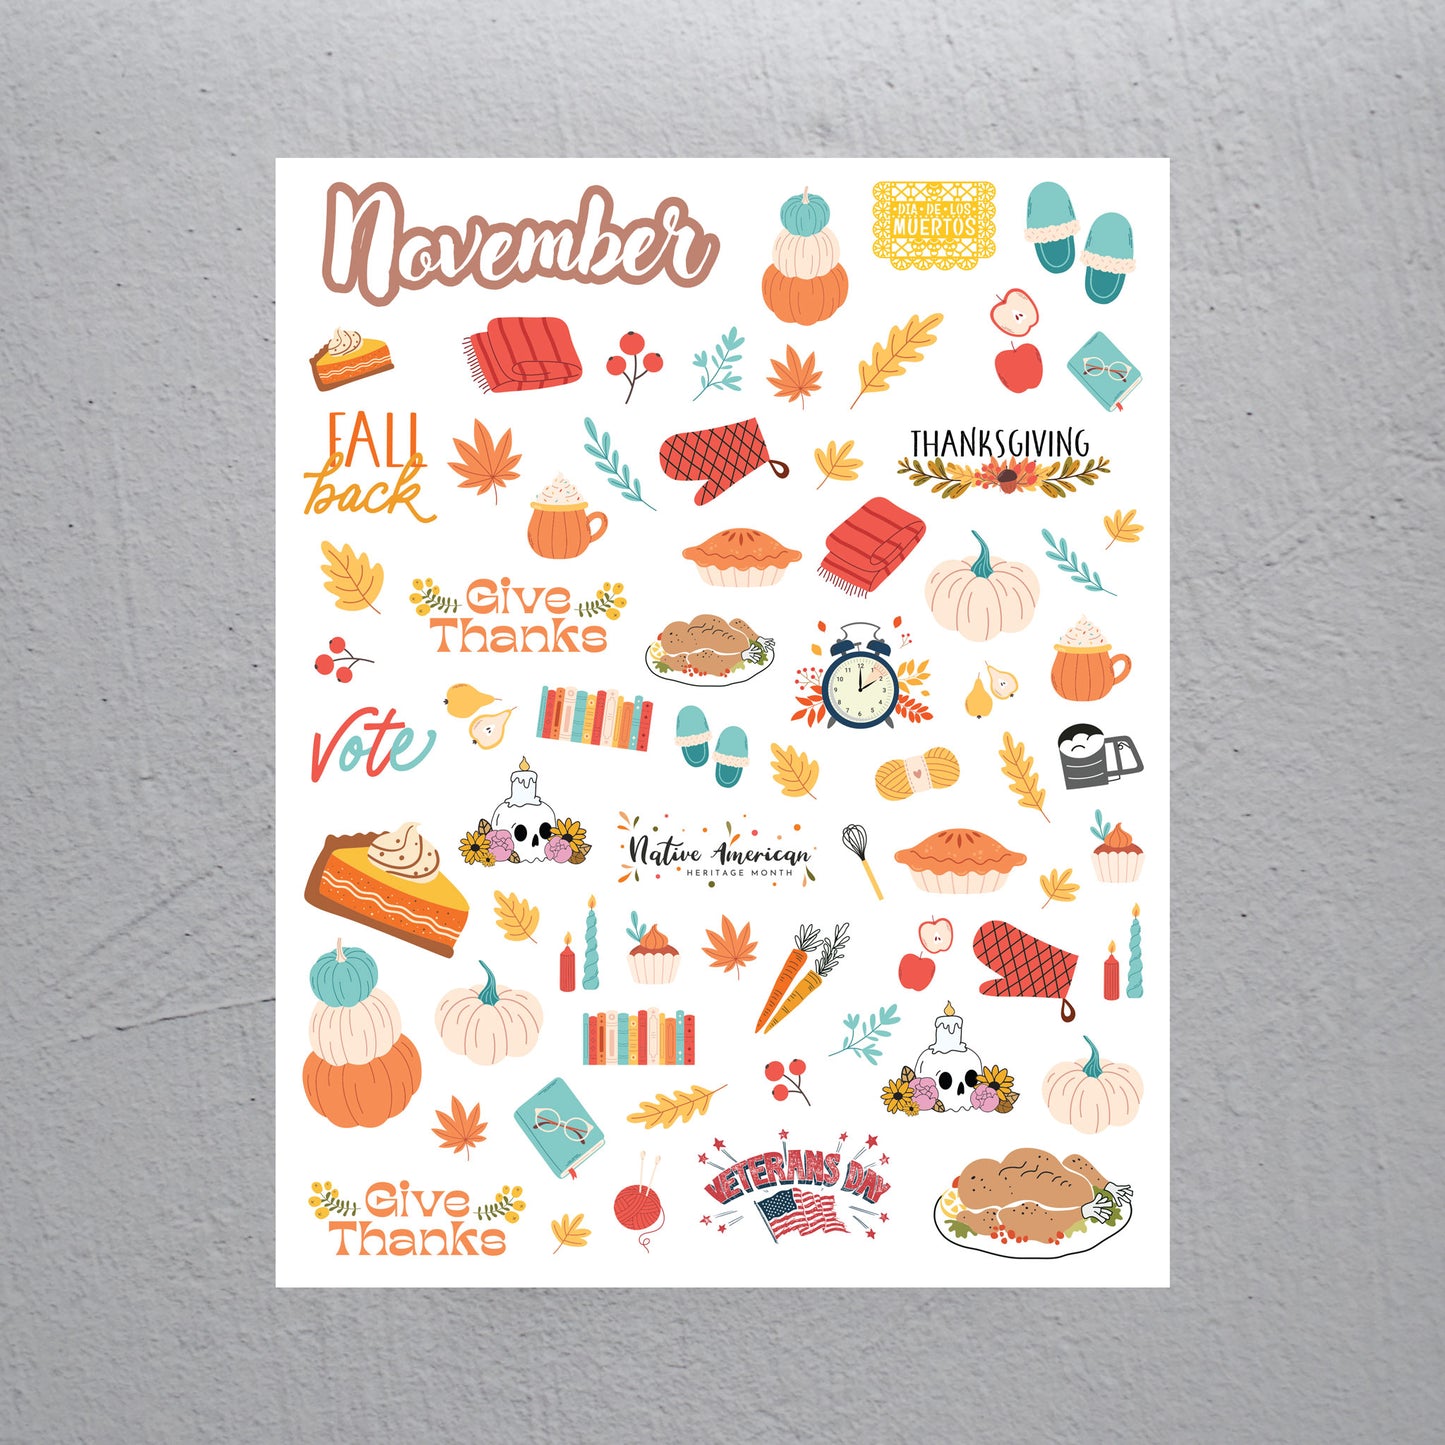 November Stickers - Assorted Monthly Themed Stickers (2 Sheets)